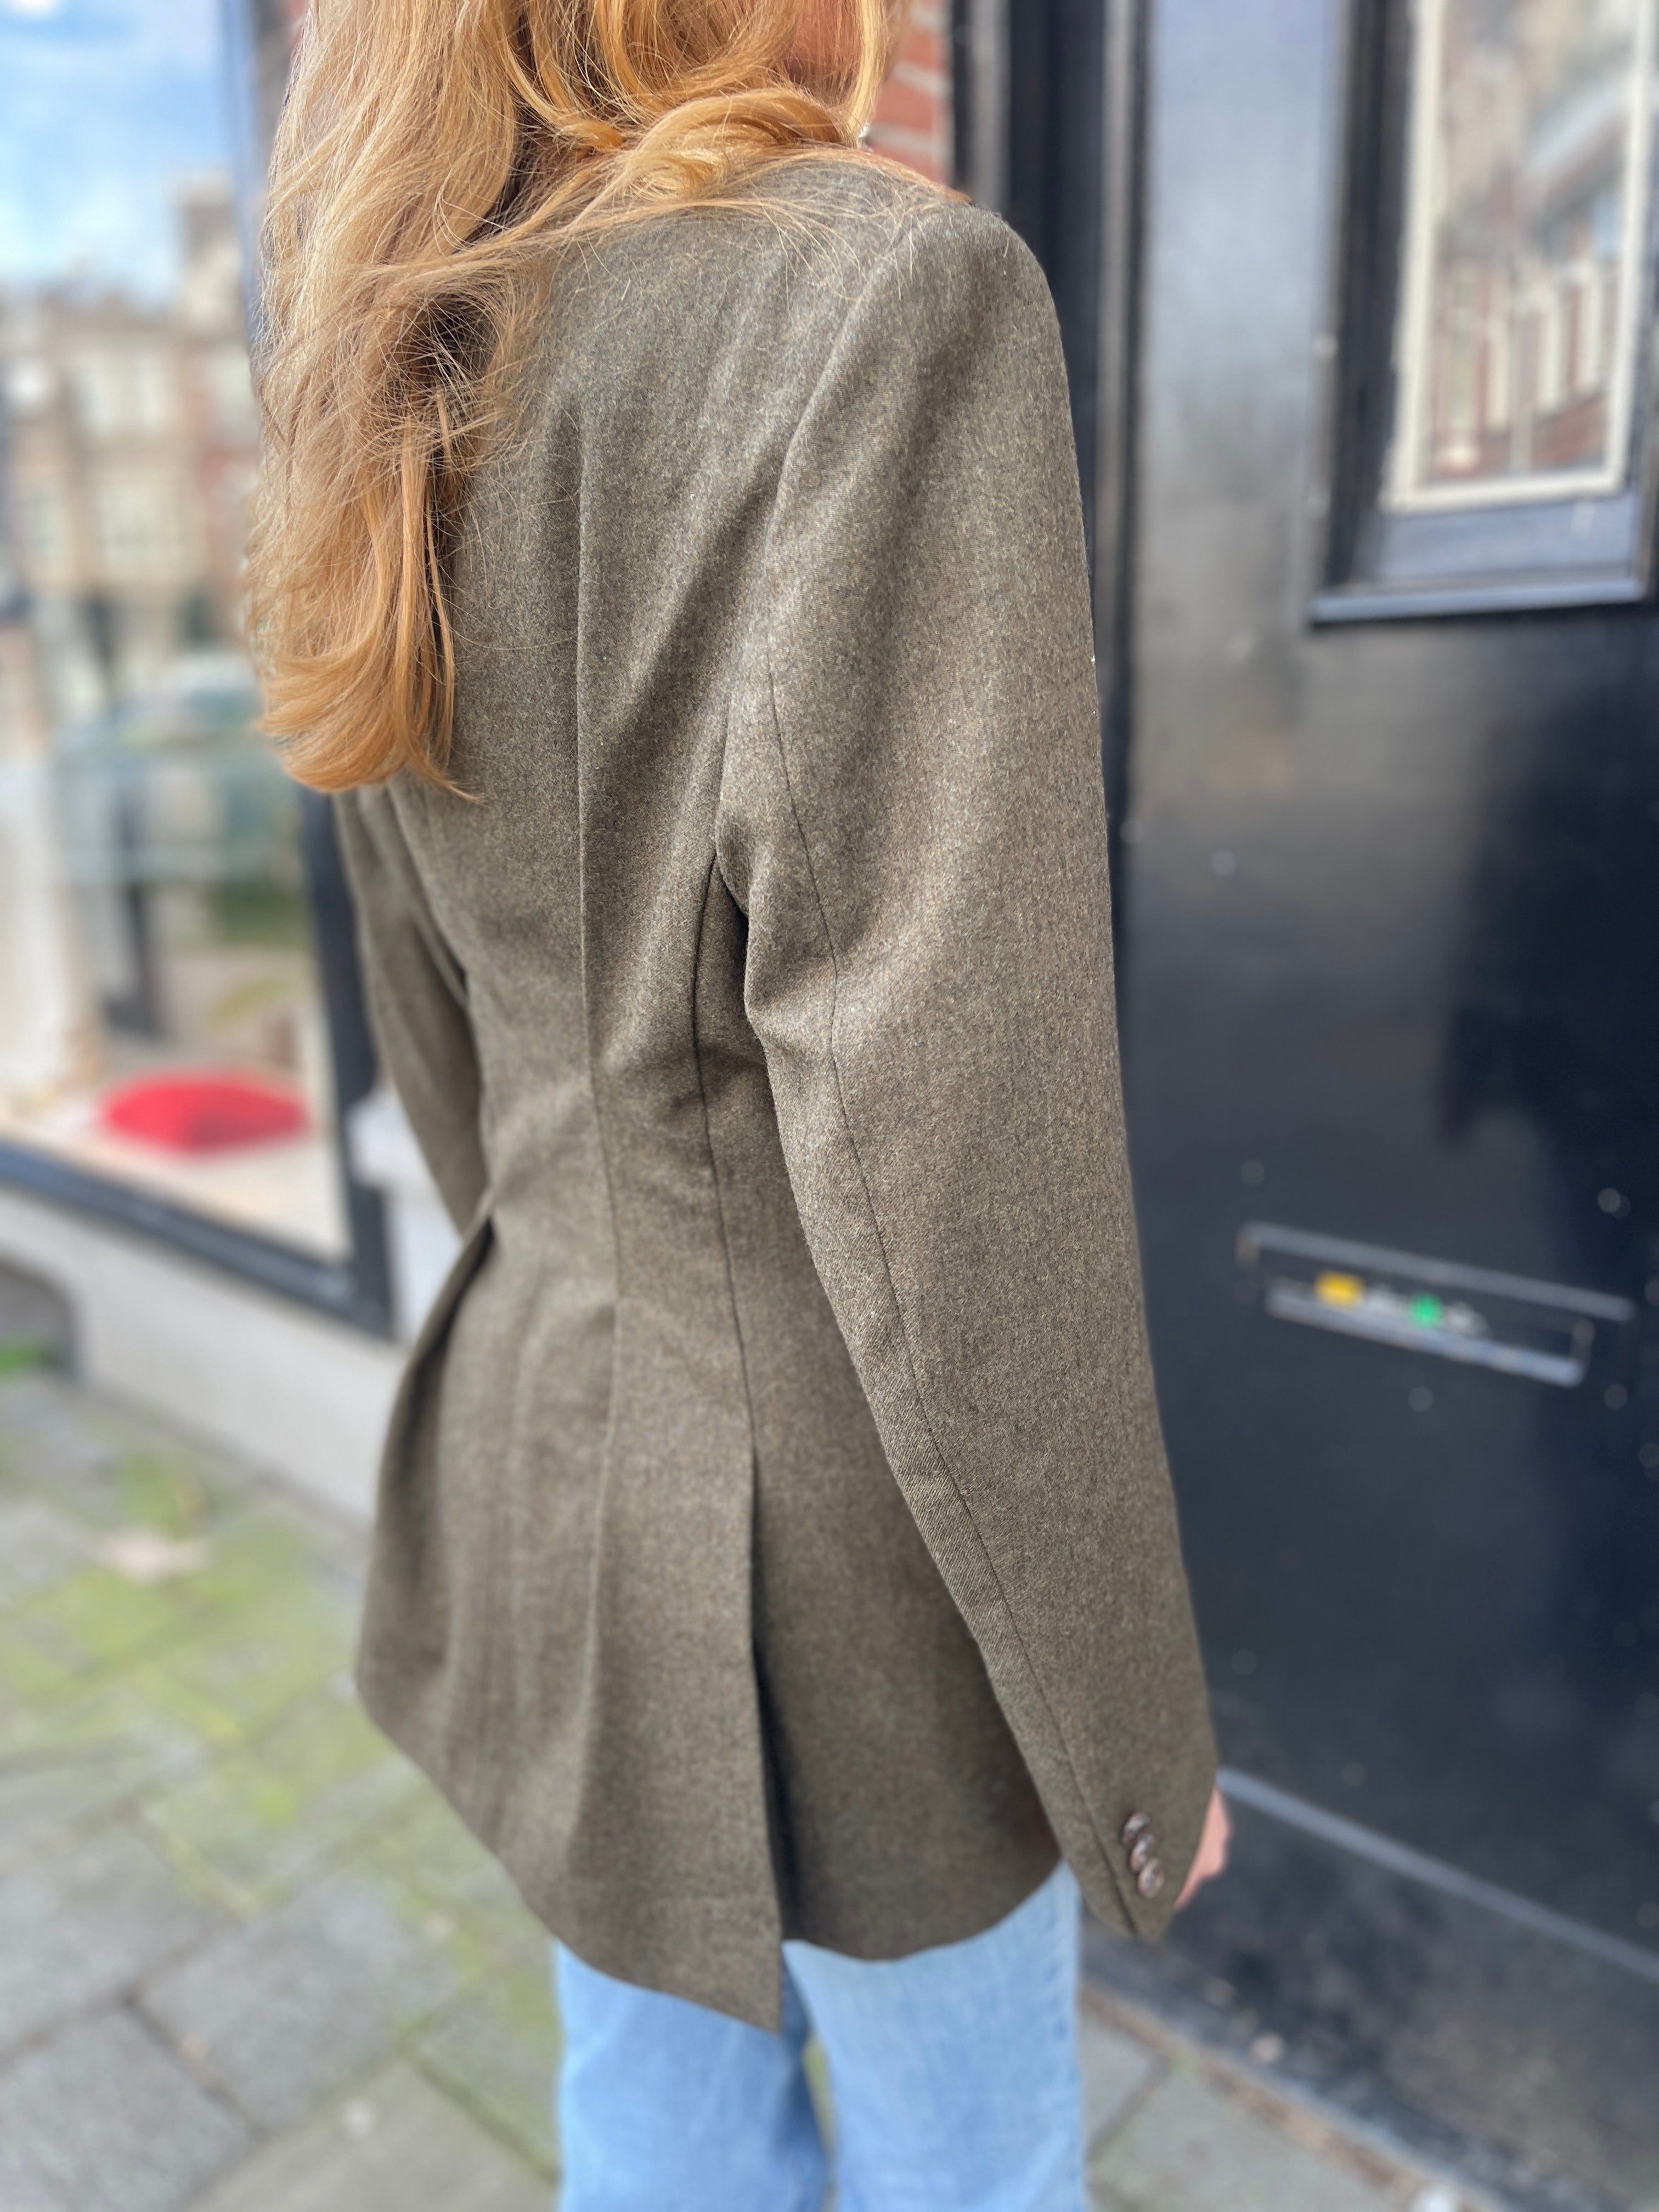 Army green fitted blazer.